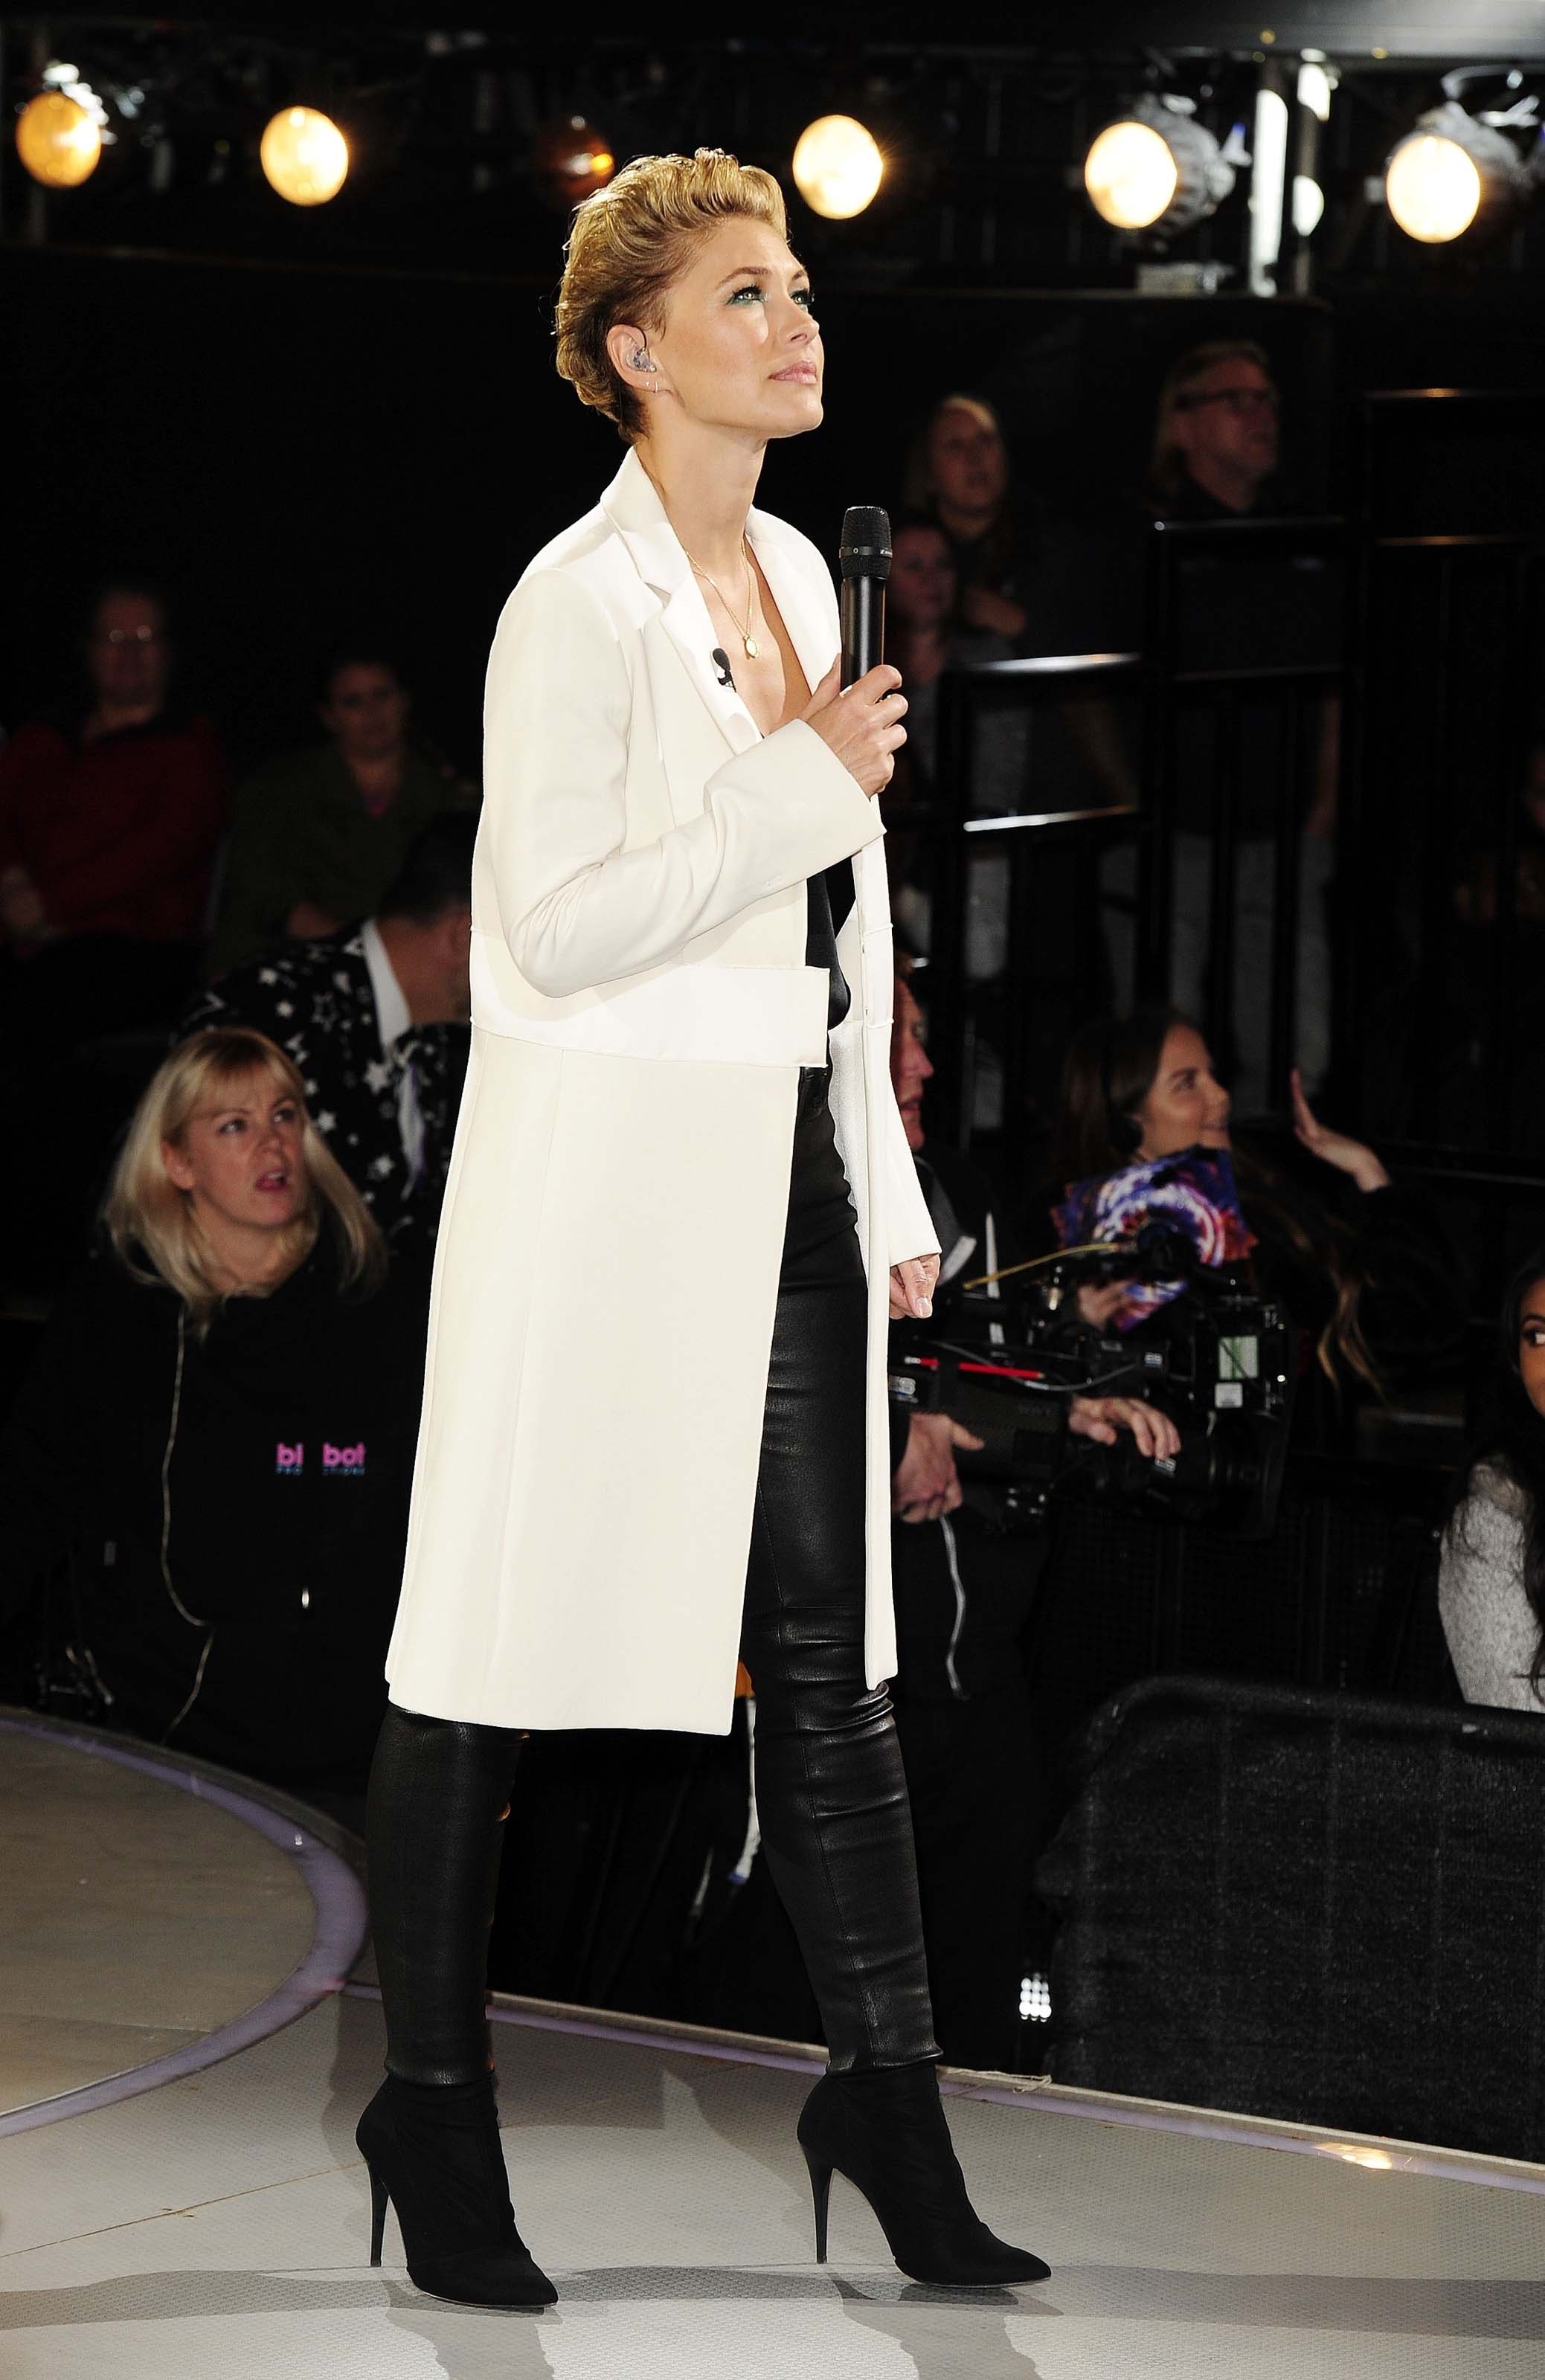 Emma Willis attends Big Brother Eviction Night Show